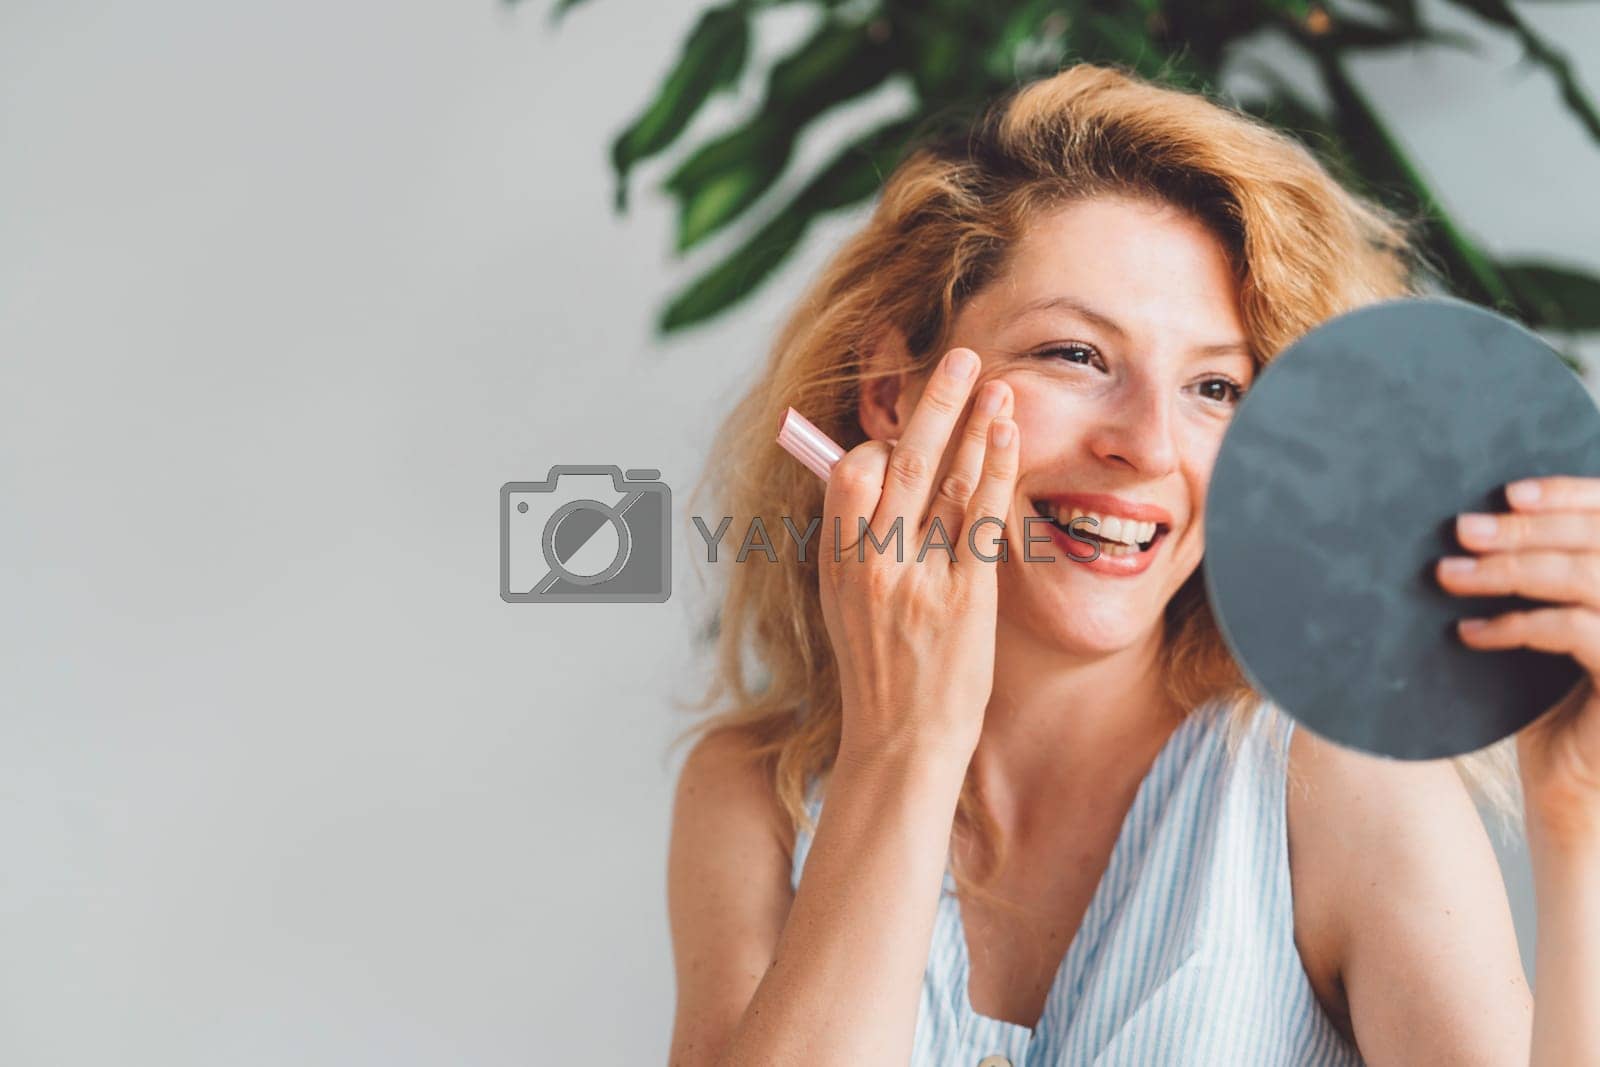 Royalty free image of Smiling woman doing her make up looking at her self in a mirror she is holding up by VisualProductions